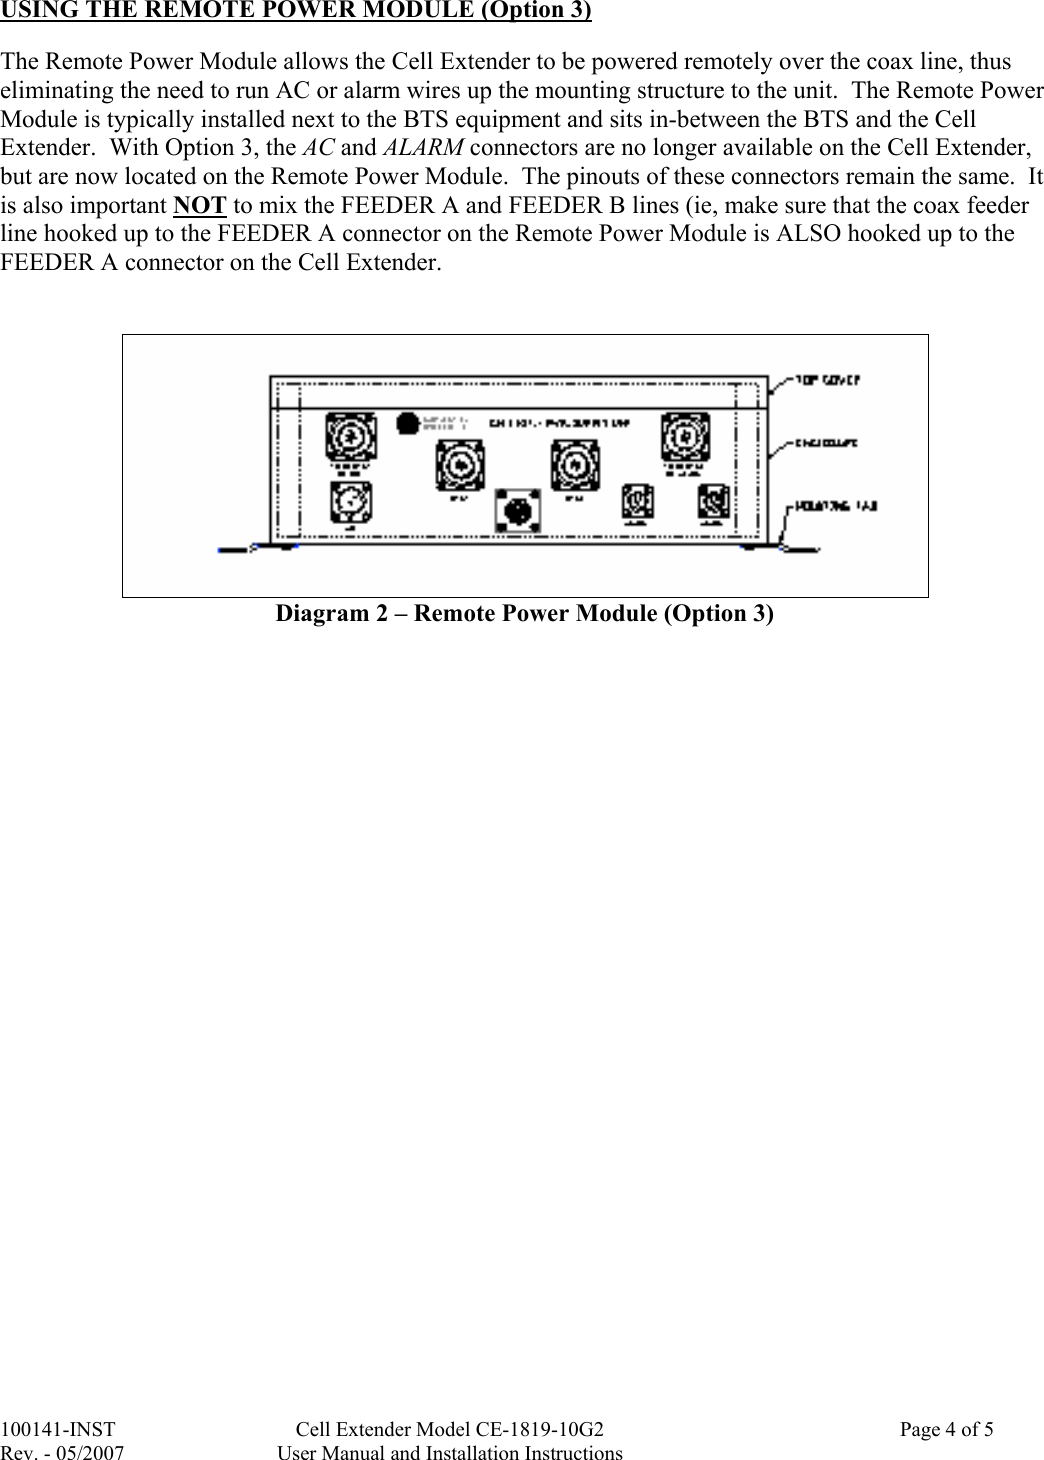 100141-INST  Cell Extender Model CE-1819-10G2    Page 4 of 5  Rev. - 05/2007  User Manual and Installation Instructions  USING THE REMOTE POWER MODULE (Option 3)  The Remote Power Module allows the Cell Extender to be powered remotely over the coax line, thus eliminating the need to run AC or alarm wires up the mounting structure to the unit.  The Remote Power Module is typically installed next to the BTS equipment and sits in-between the BTS and the Cell Extender.  With Option 3, the AC and ALARM connectors are no longer available on the Cell Extender, but are now located on the Remote Power Module.  The pinouts of these connectors remain the same.  It is also important NOT to mix the FEEDER A and FEEDER B lines (ie, make sure that the coax feeder line hooked up to the FEEDER A connector on the Remote Power Module is ALSO hooked up to the FEEDER A connector on the Cell Extender.     Diagram 2 – Remote Power Module (Option 3)                                 